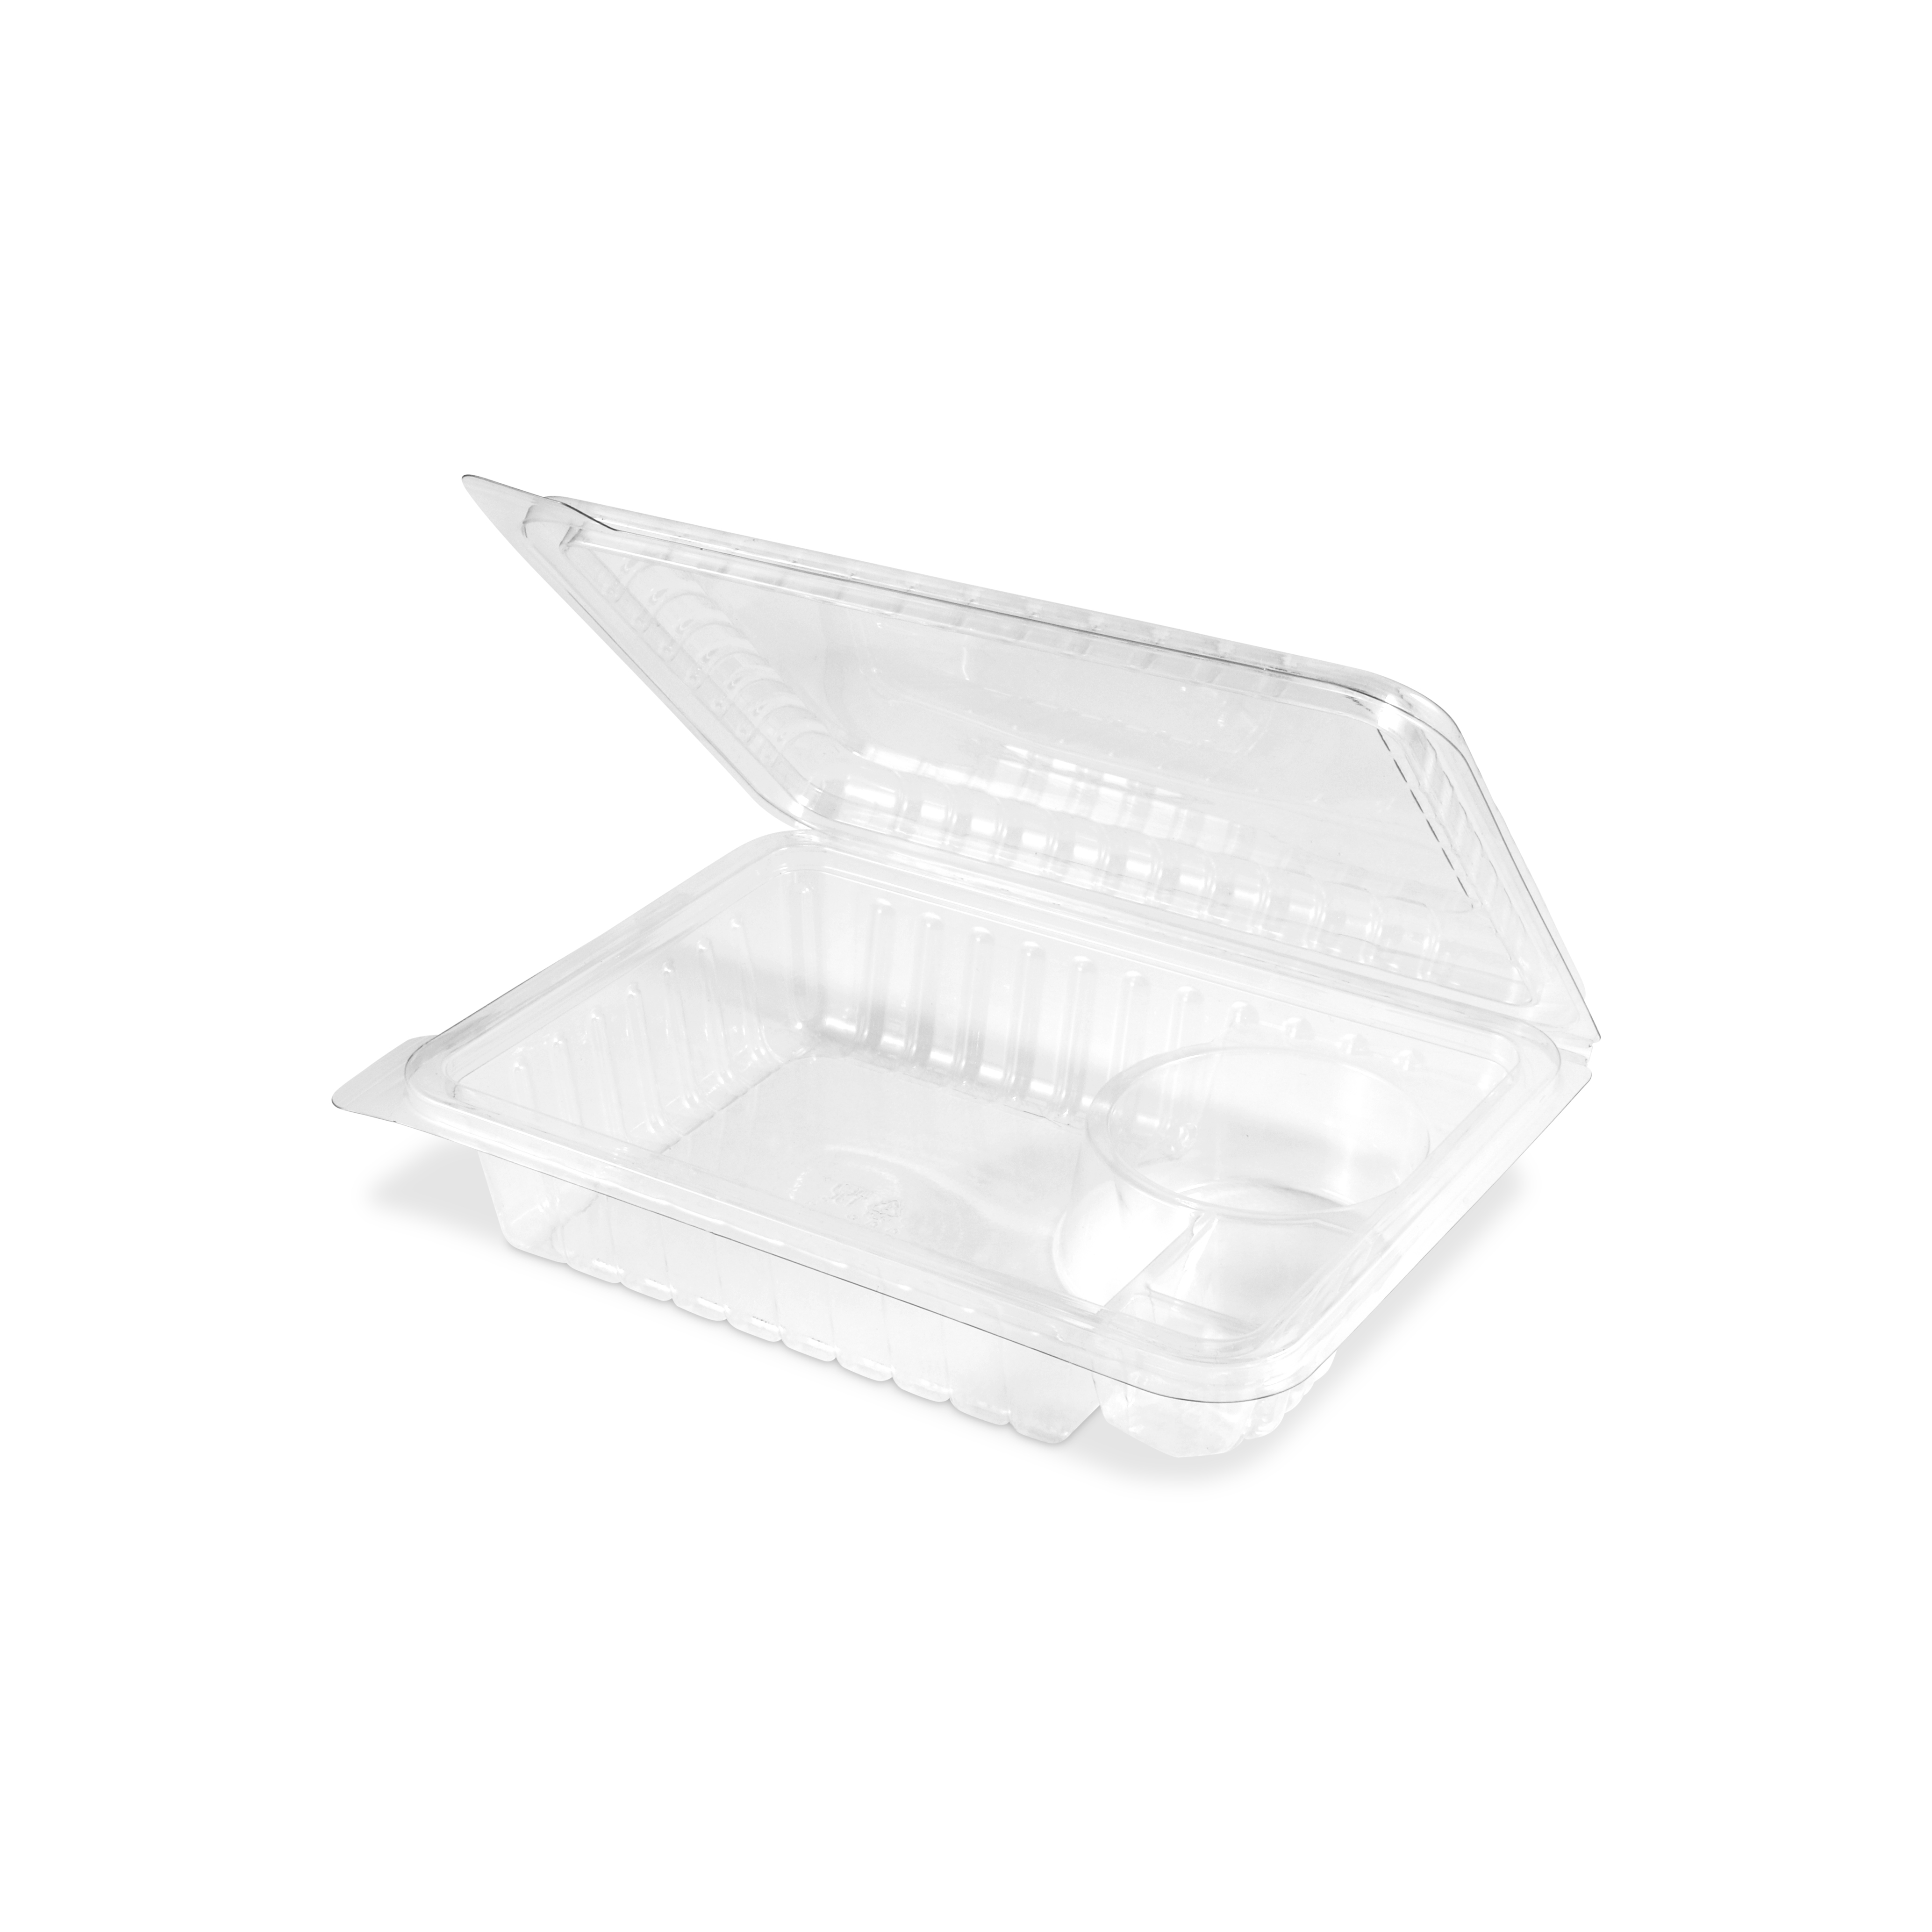 https://www.berryglobal.com/-/media/Berry/Images/Products/Berry-Global/Sushi-Tray-203mmx310mm-13662469/sushi_foldover_tub_38f_13662469.ashx